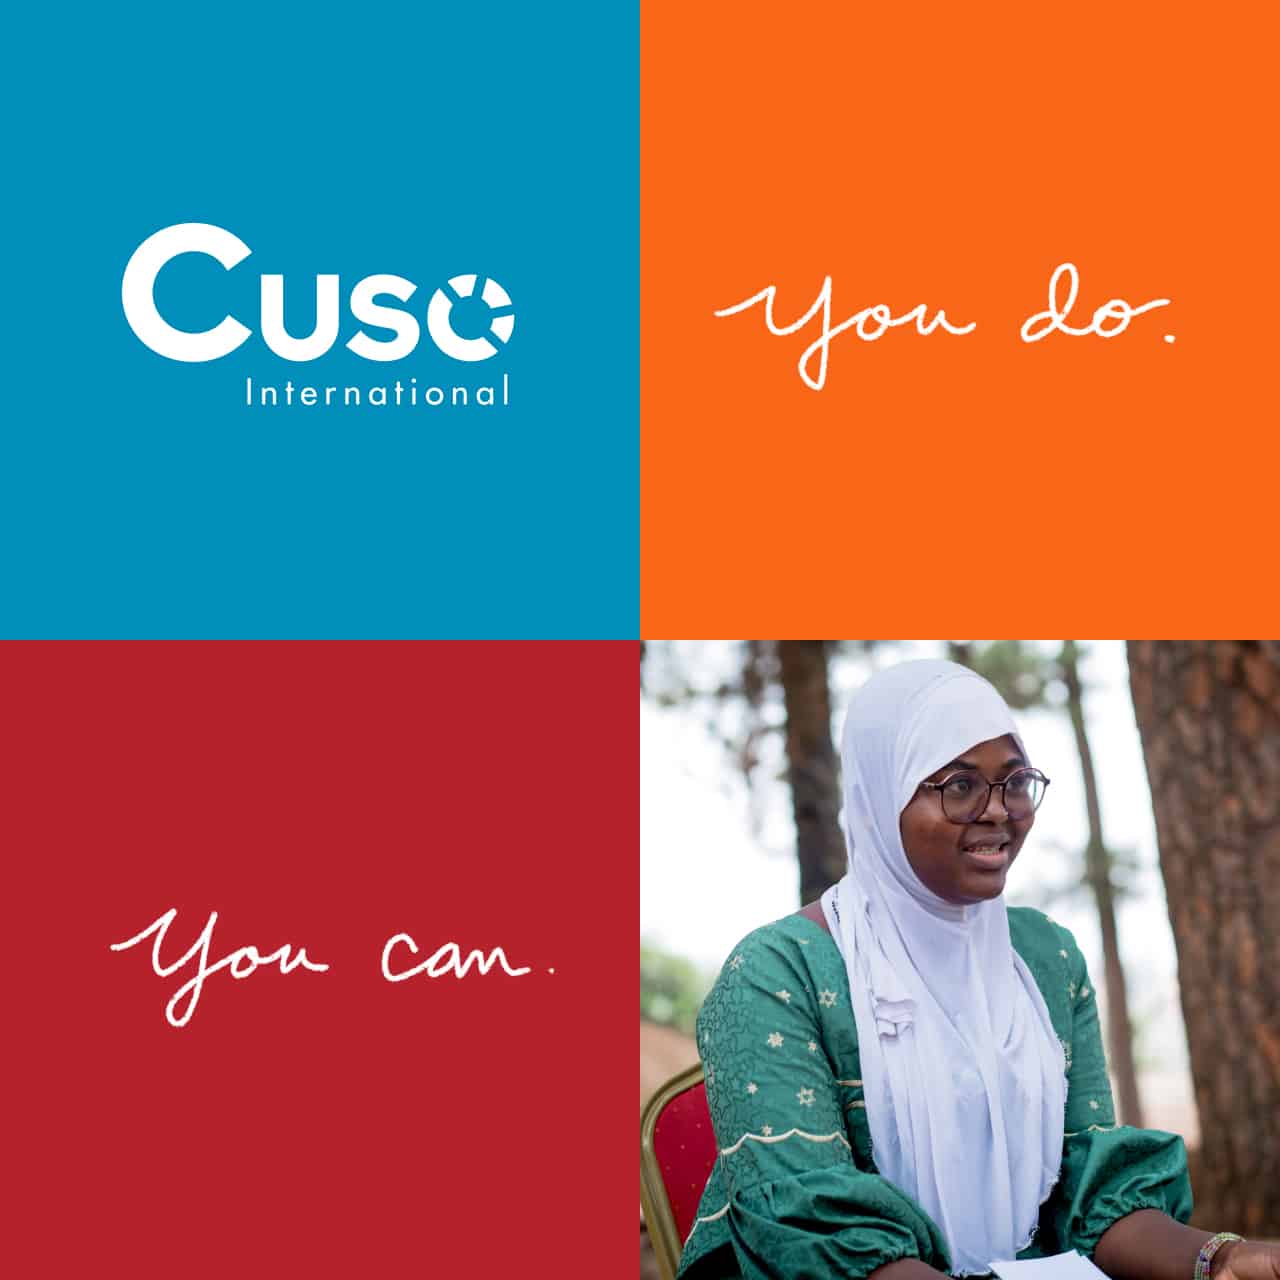 square graphic with the Cuso International logo and text reading "you do." and "you can." and a photo of a woman smiling